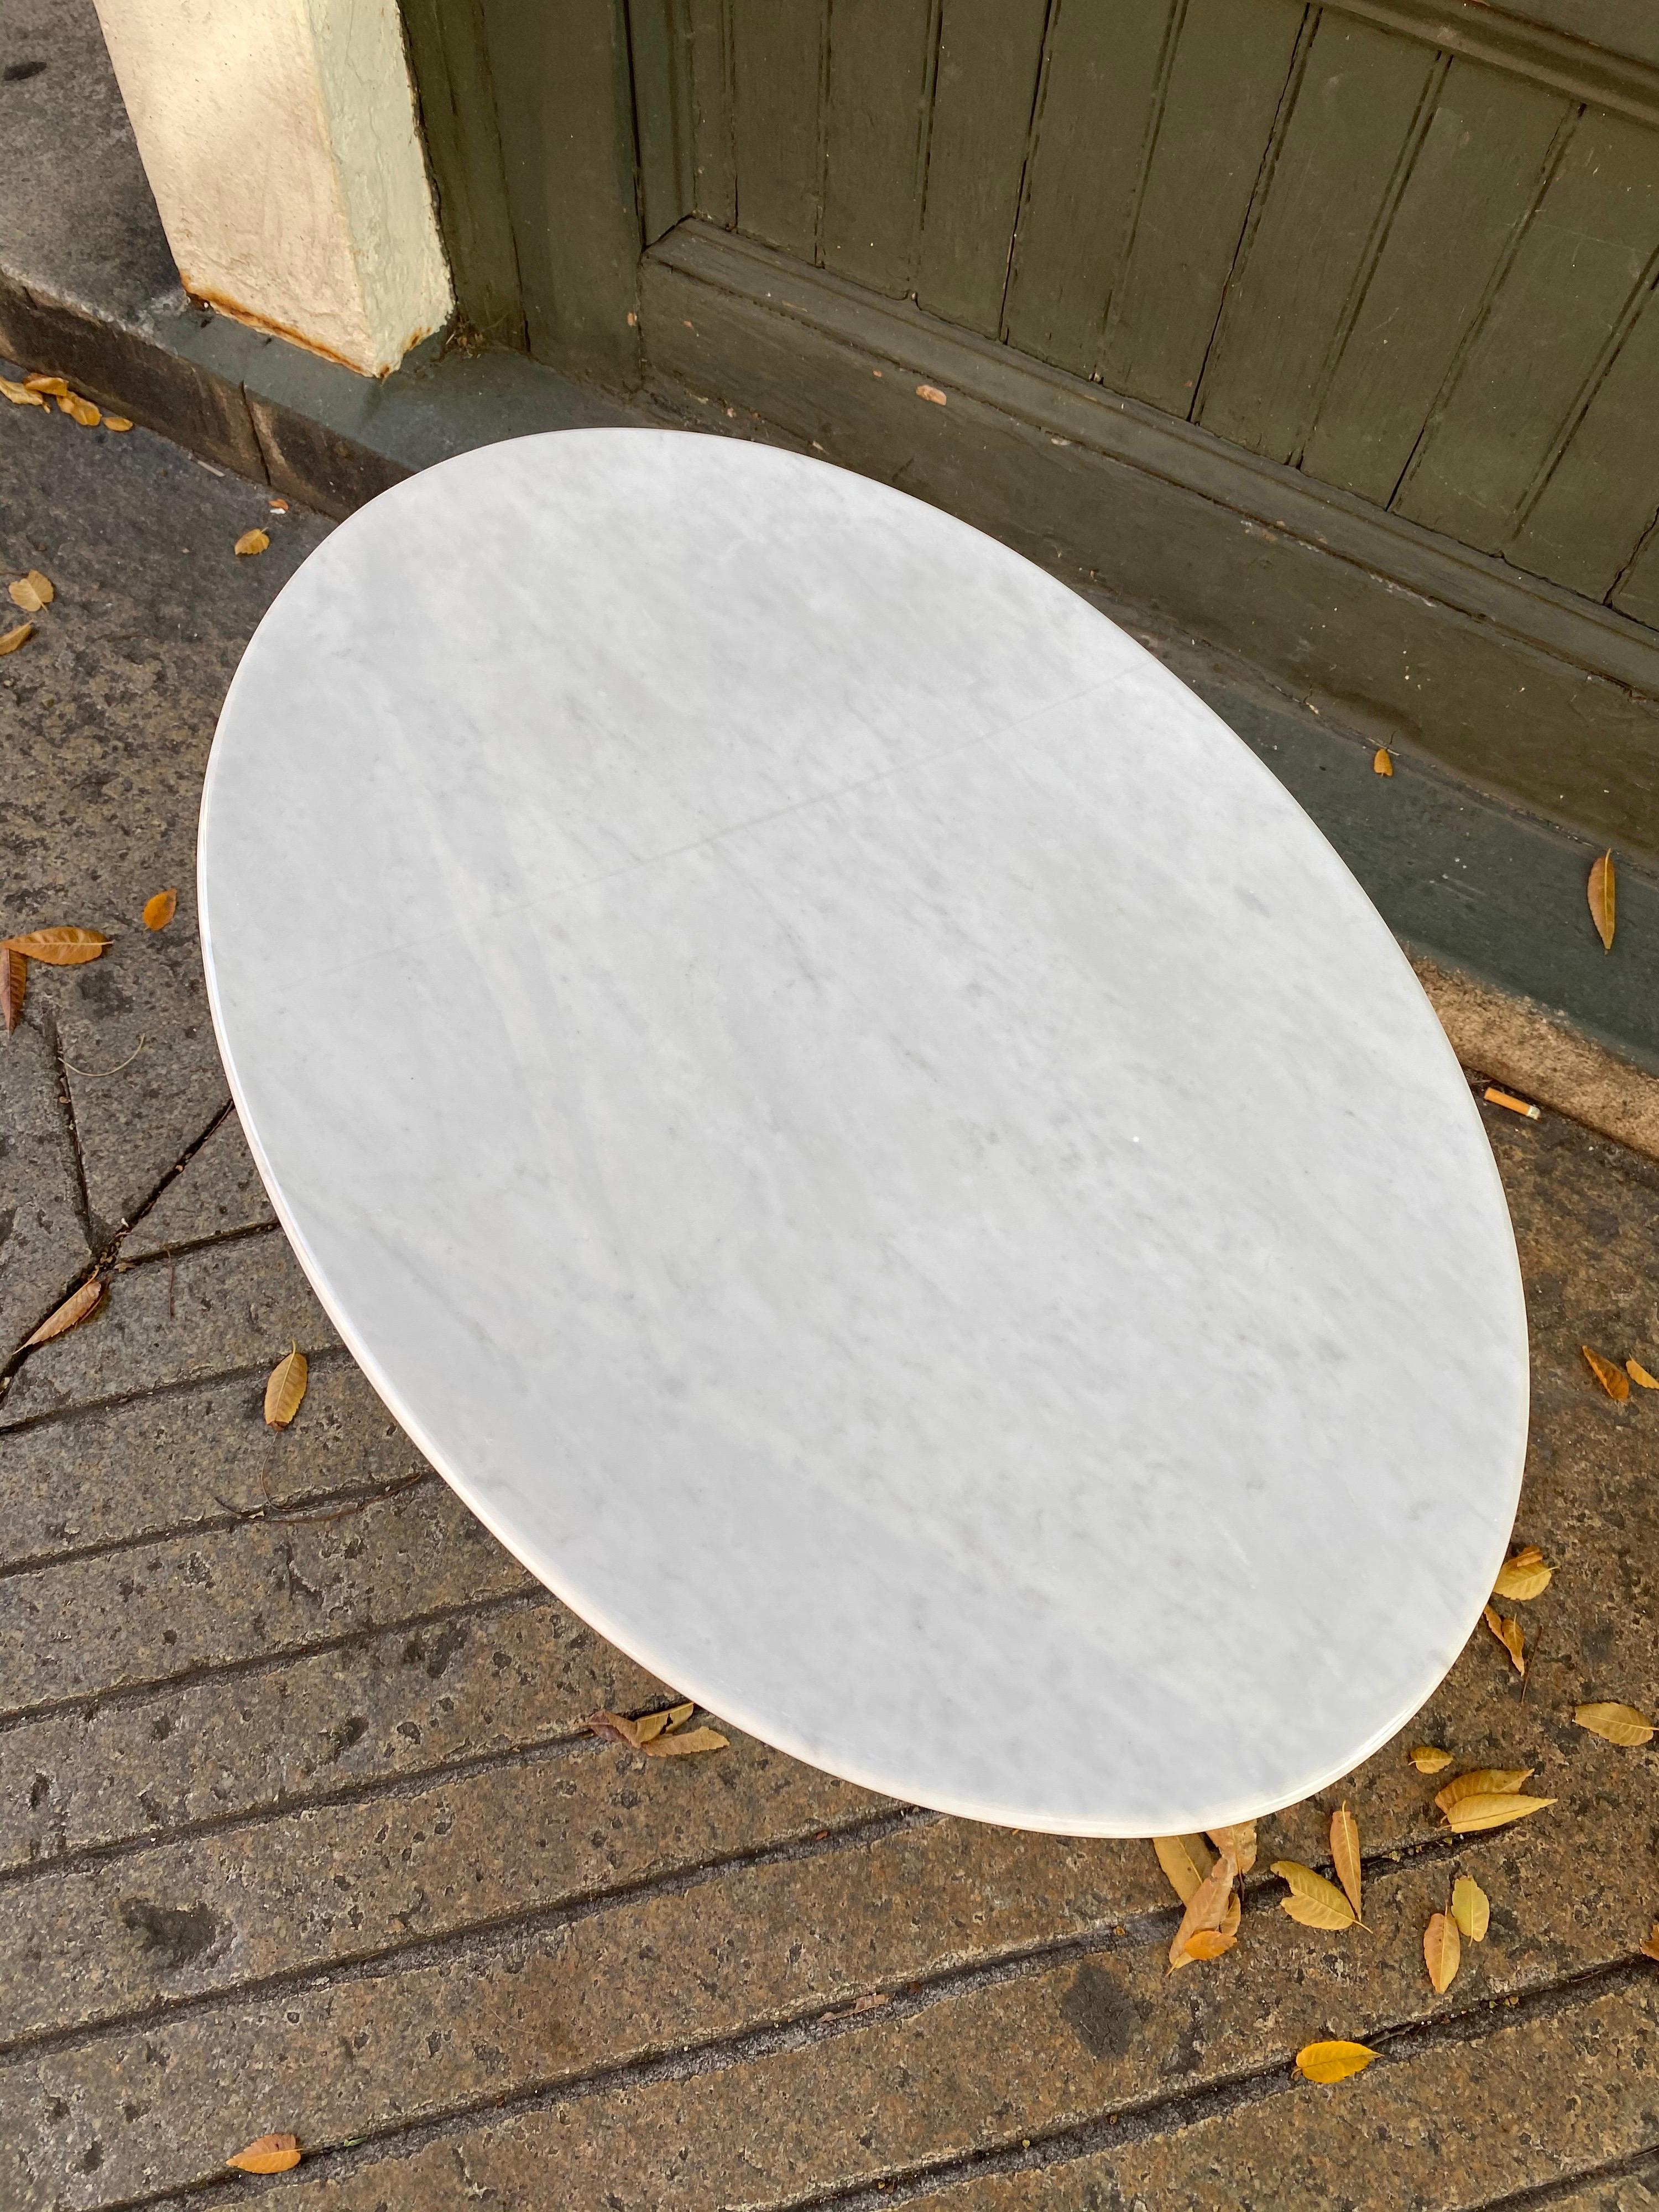 Saarinen for Knoll oval marble top table. Marble has just been professionally polished and looks great! Classic little table that fits easily into any decor! This one is probably about 10 years old. Base is very clean and retains a partial Knoll